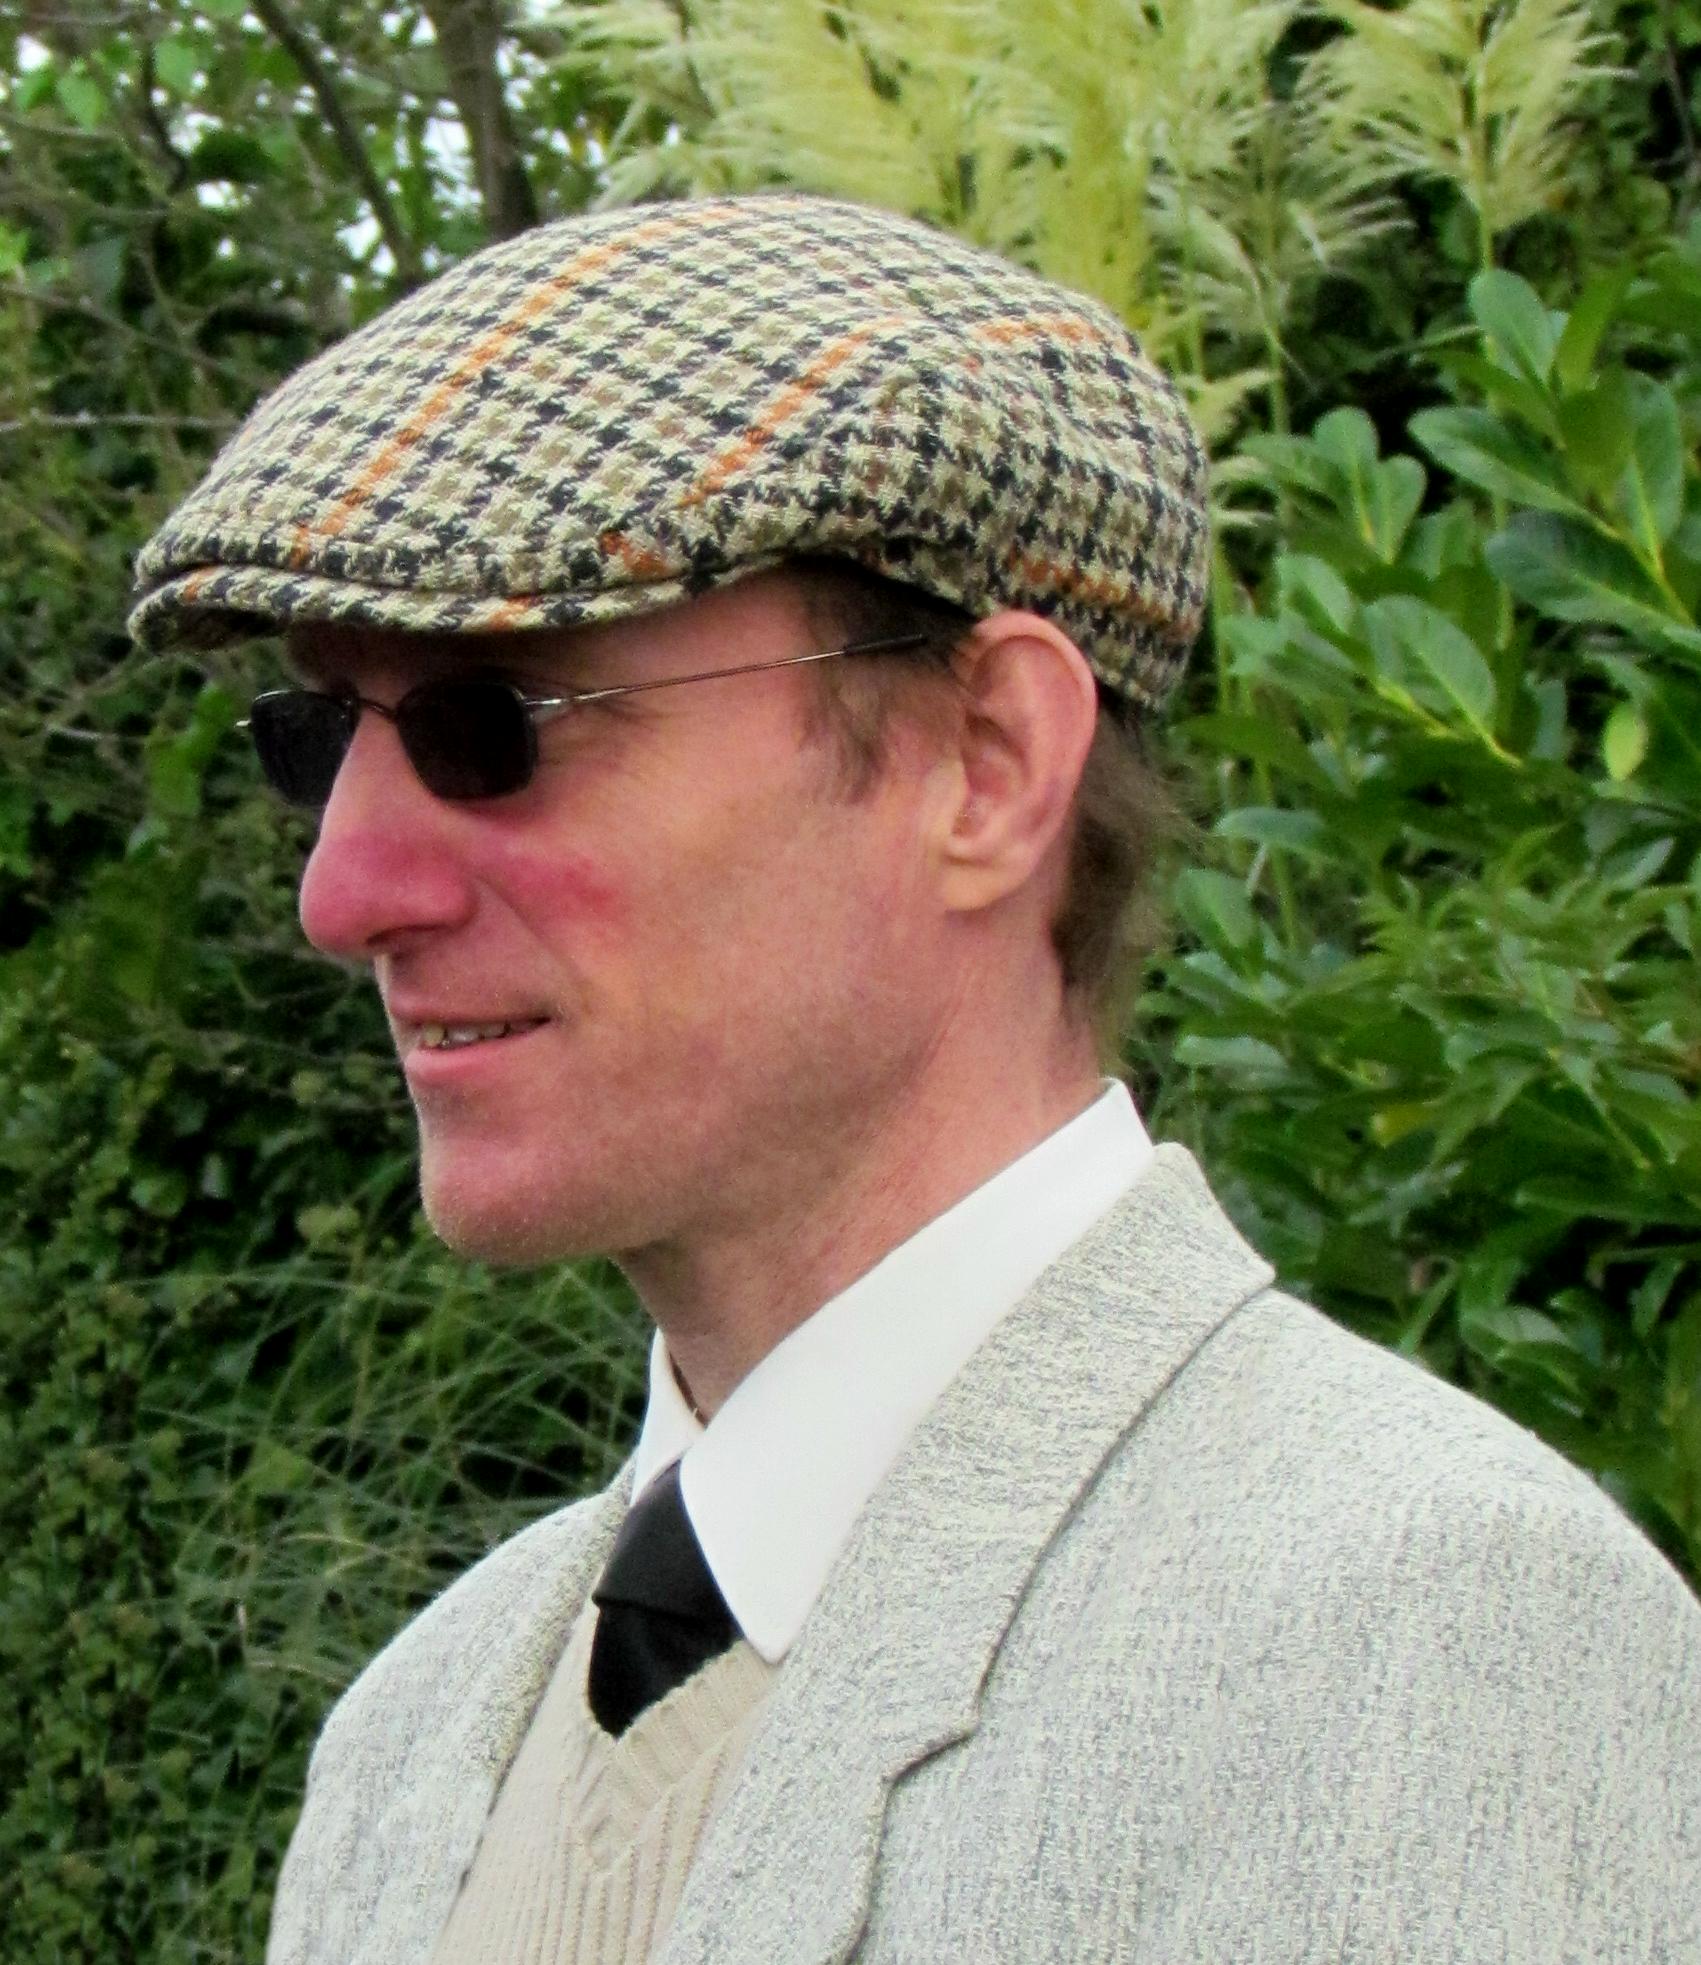 an image of a man wearing glasses and a suit